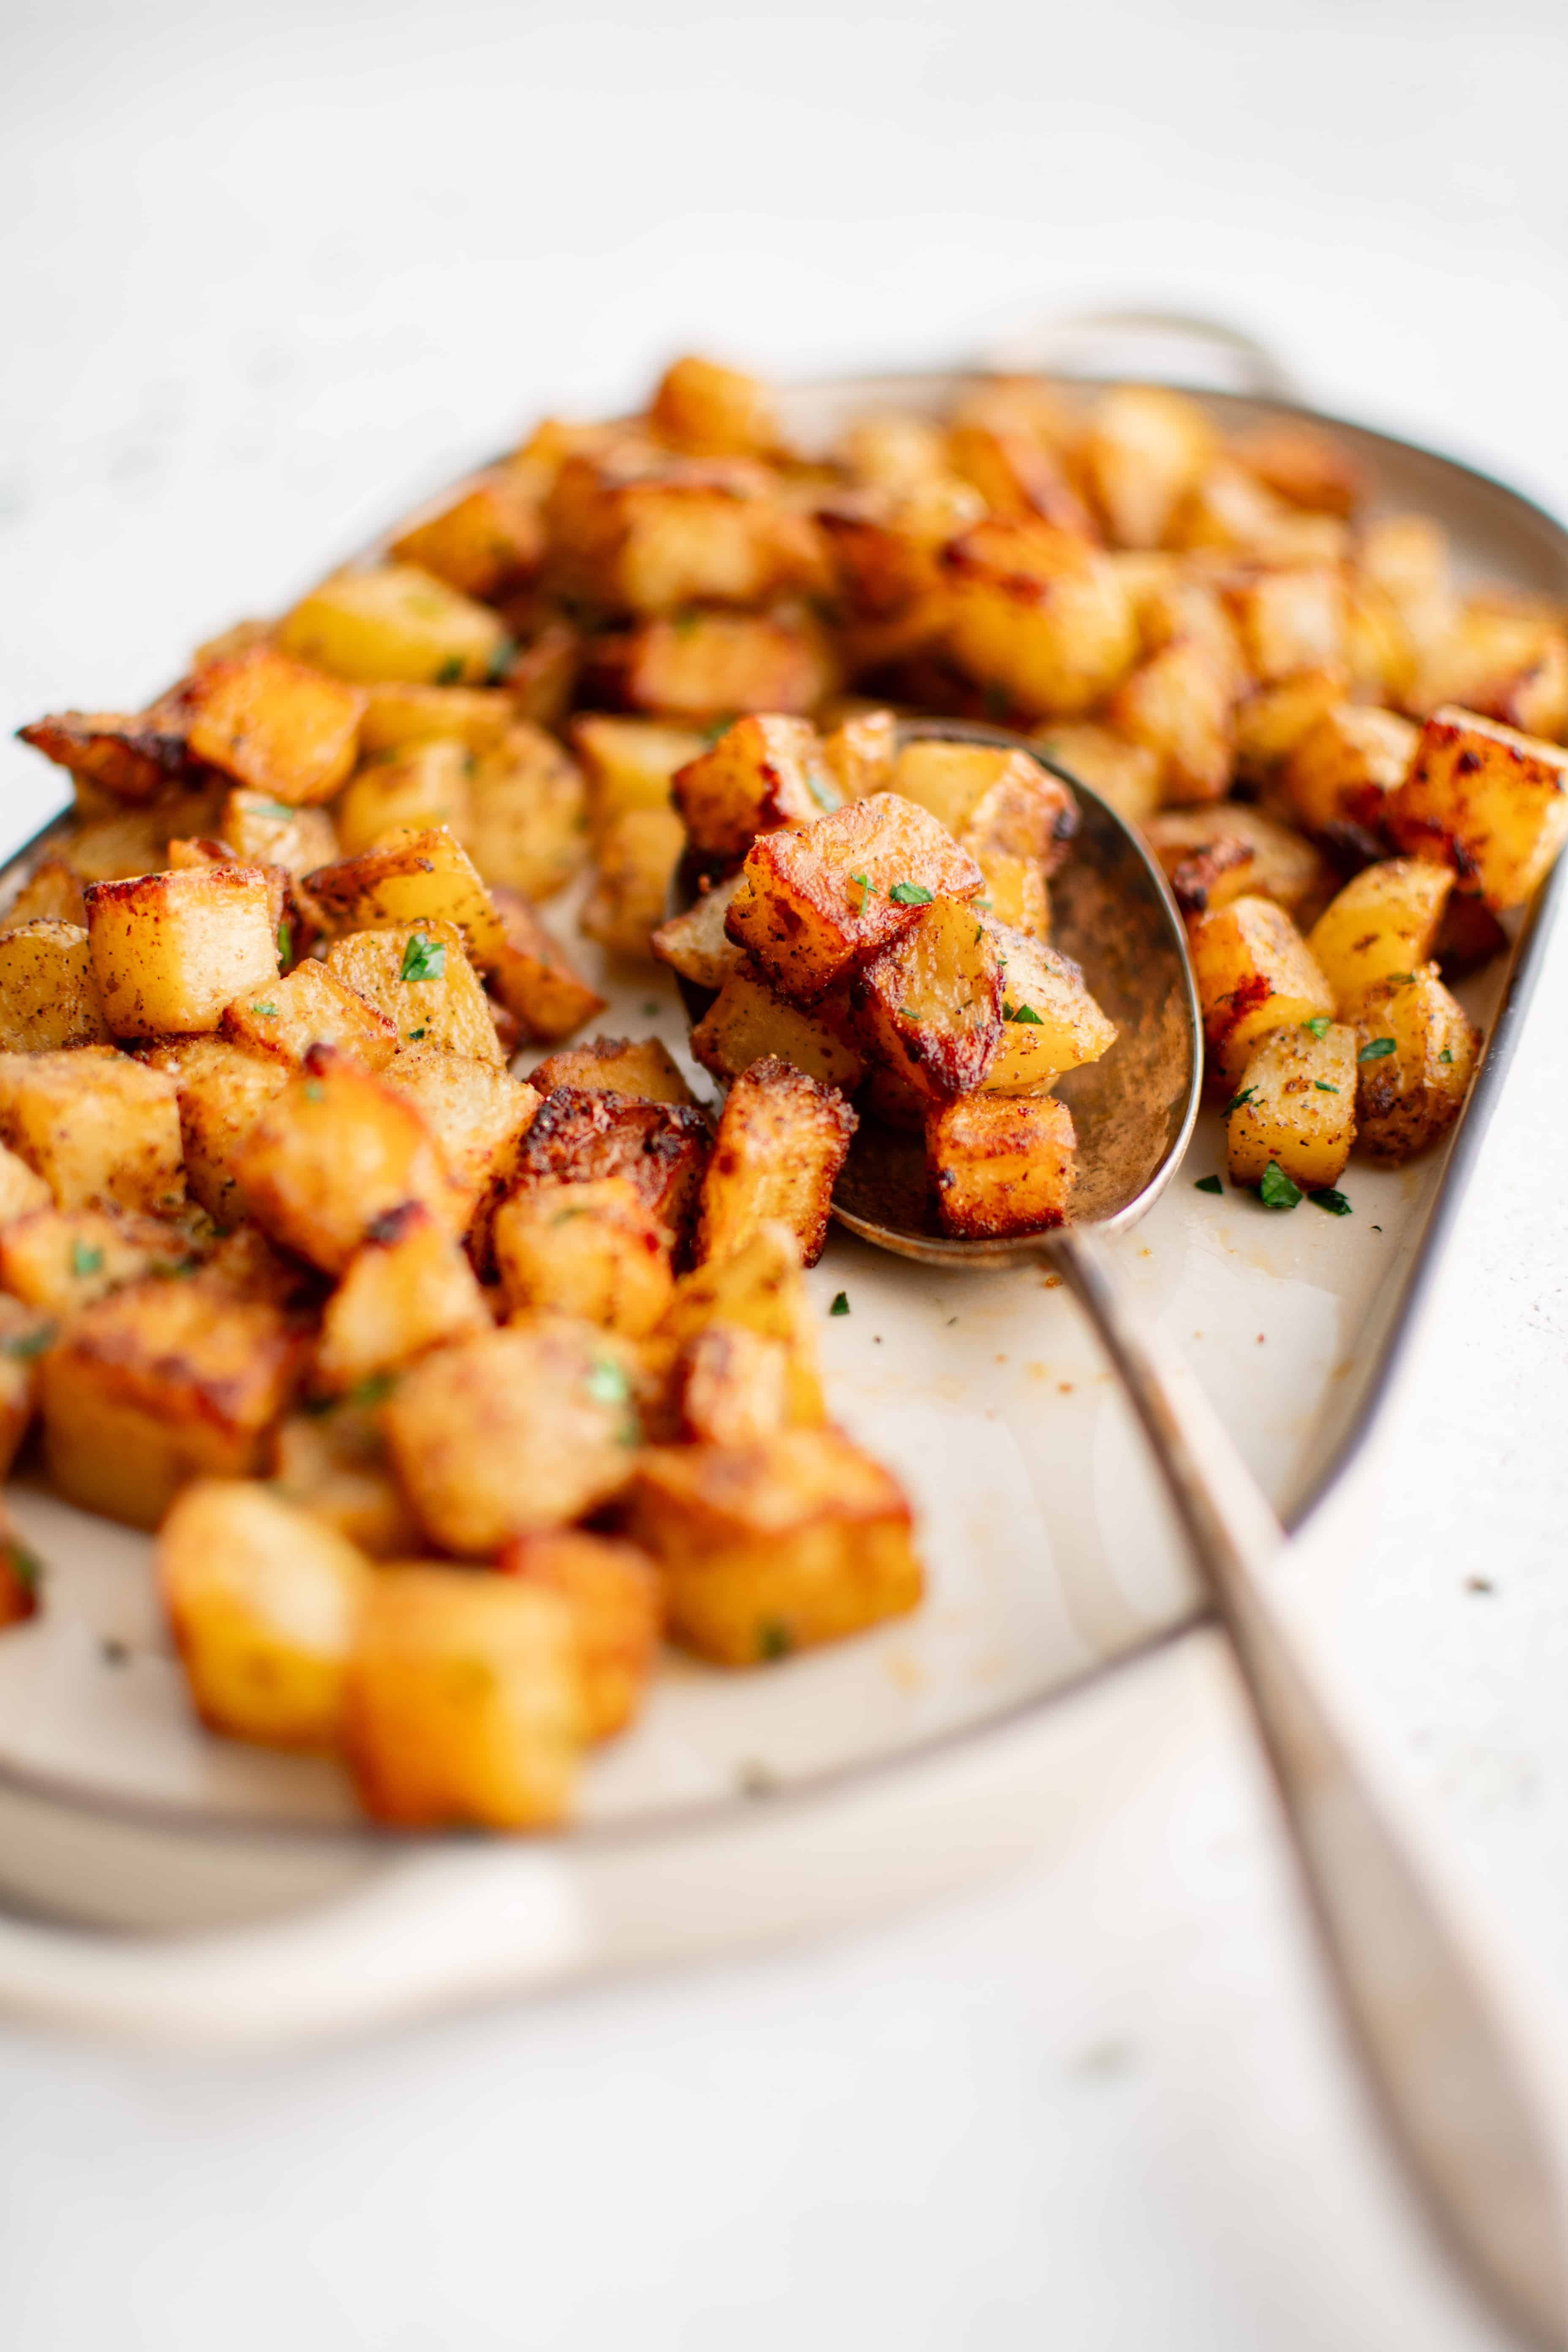 Crispy, golden, and well-seasoned breakfast potatoes cooked in the air fryer served on a medium-sized white oval serving platter.